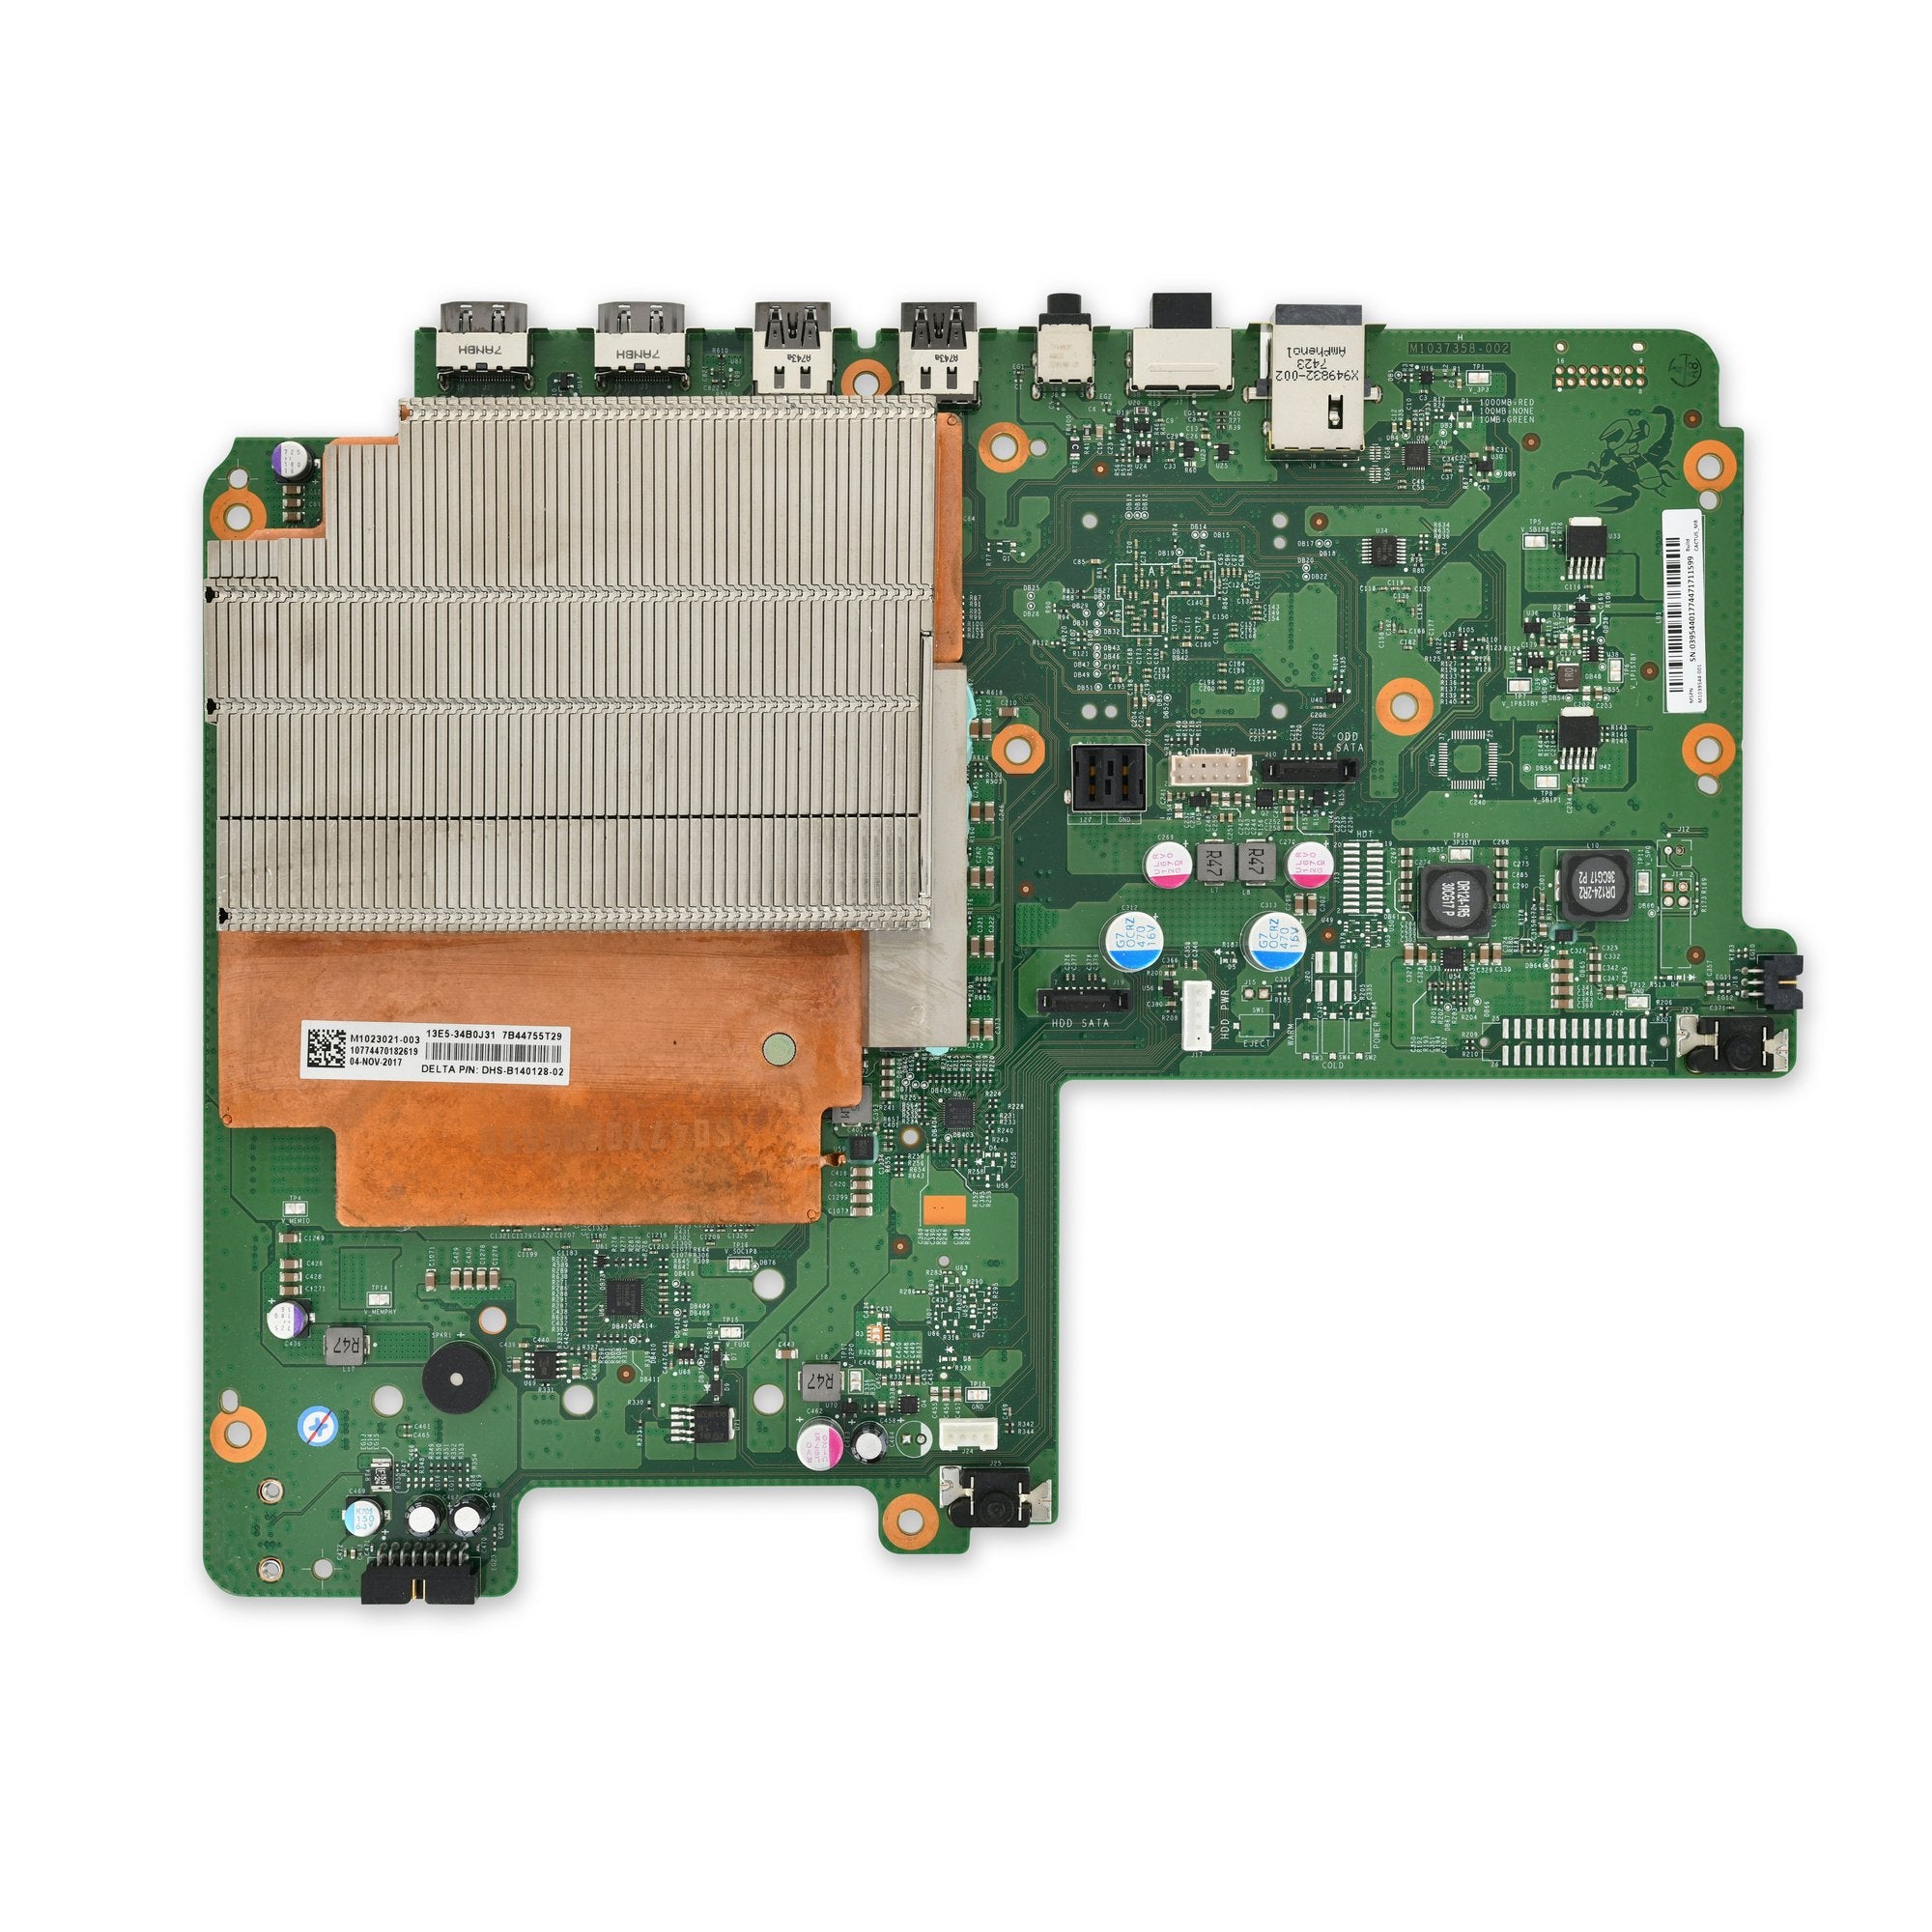 Xbox One X Motherboard and Paired Optical Drive Used